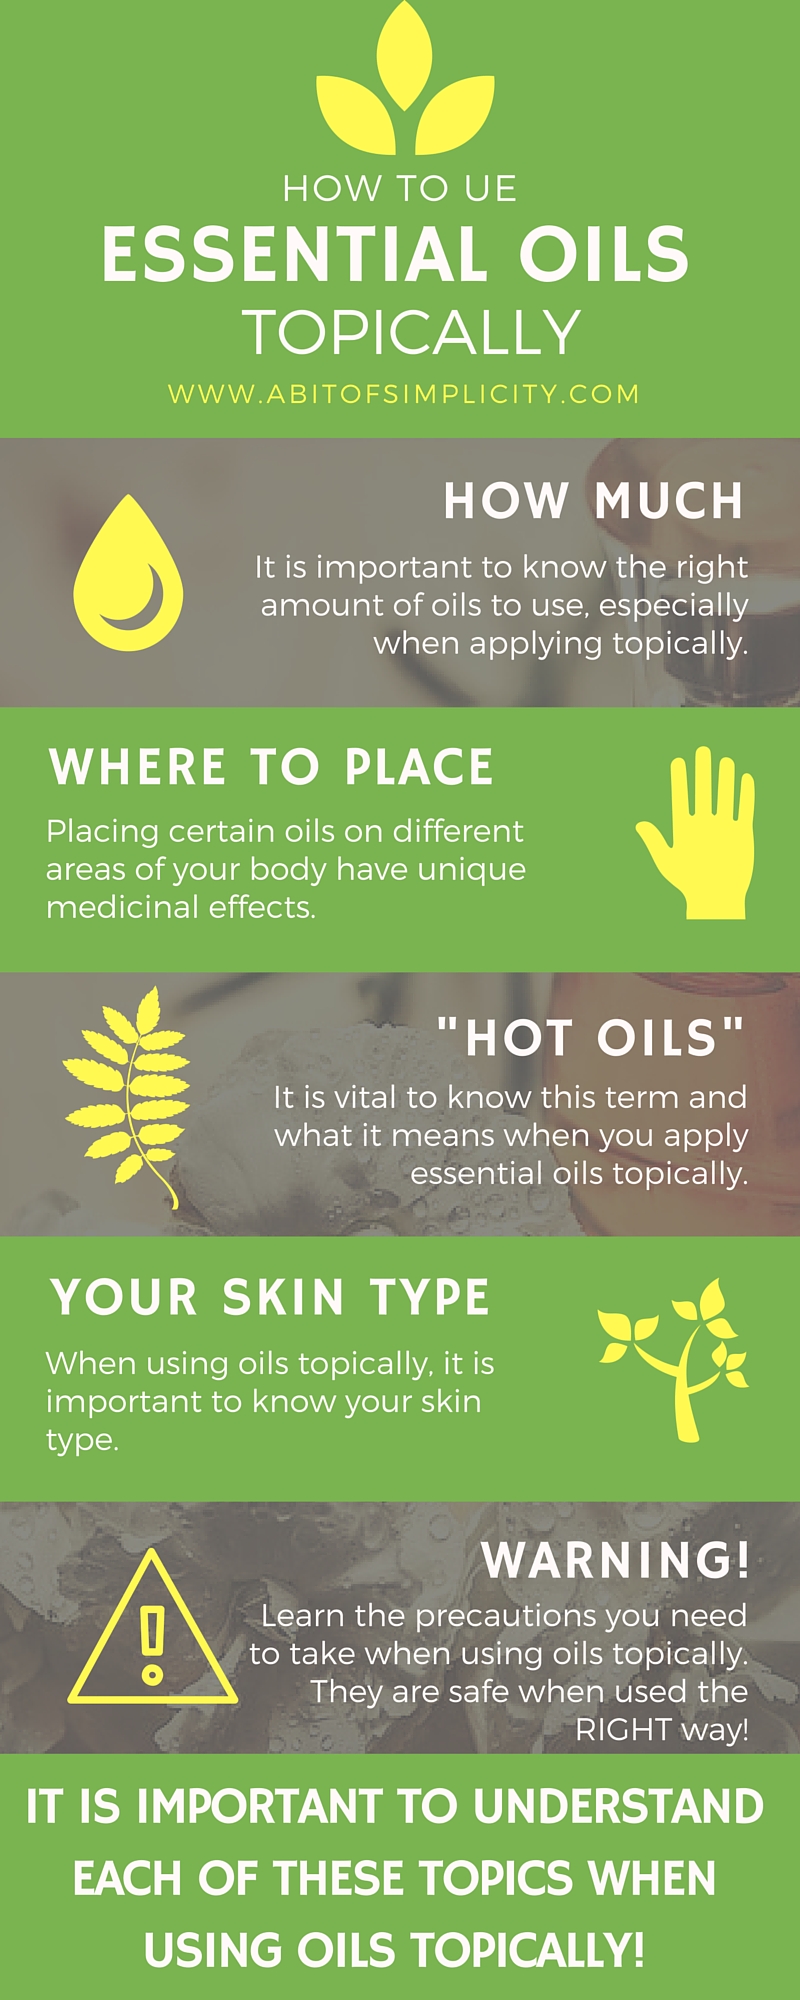 How to Use Essential Oils Topically - A Bit of Simplicity